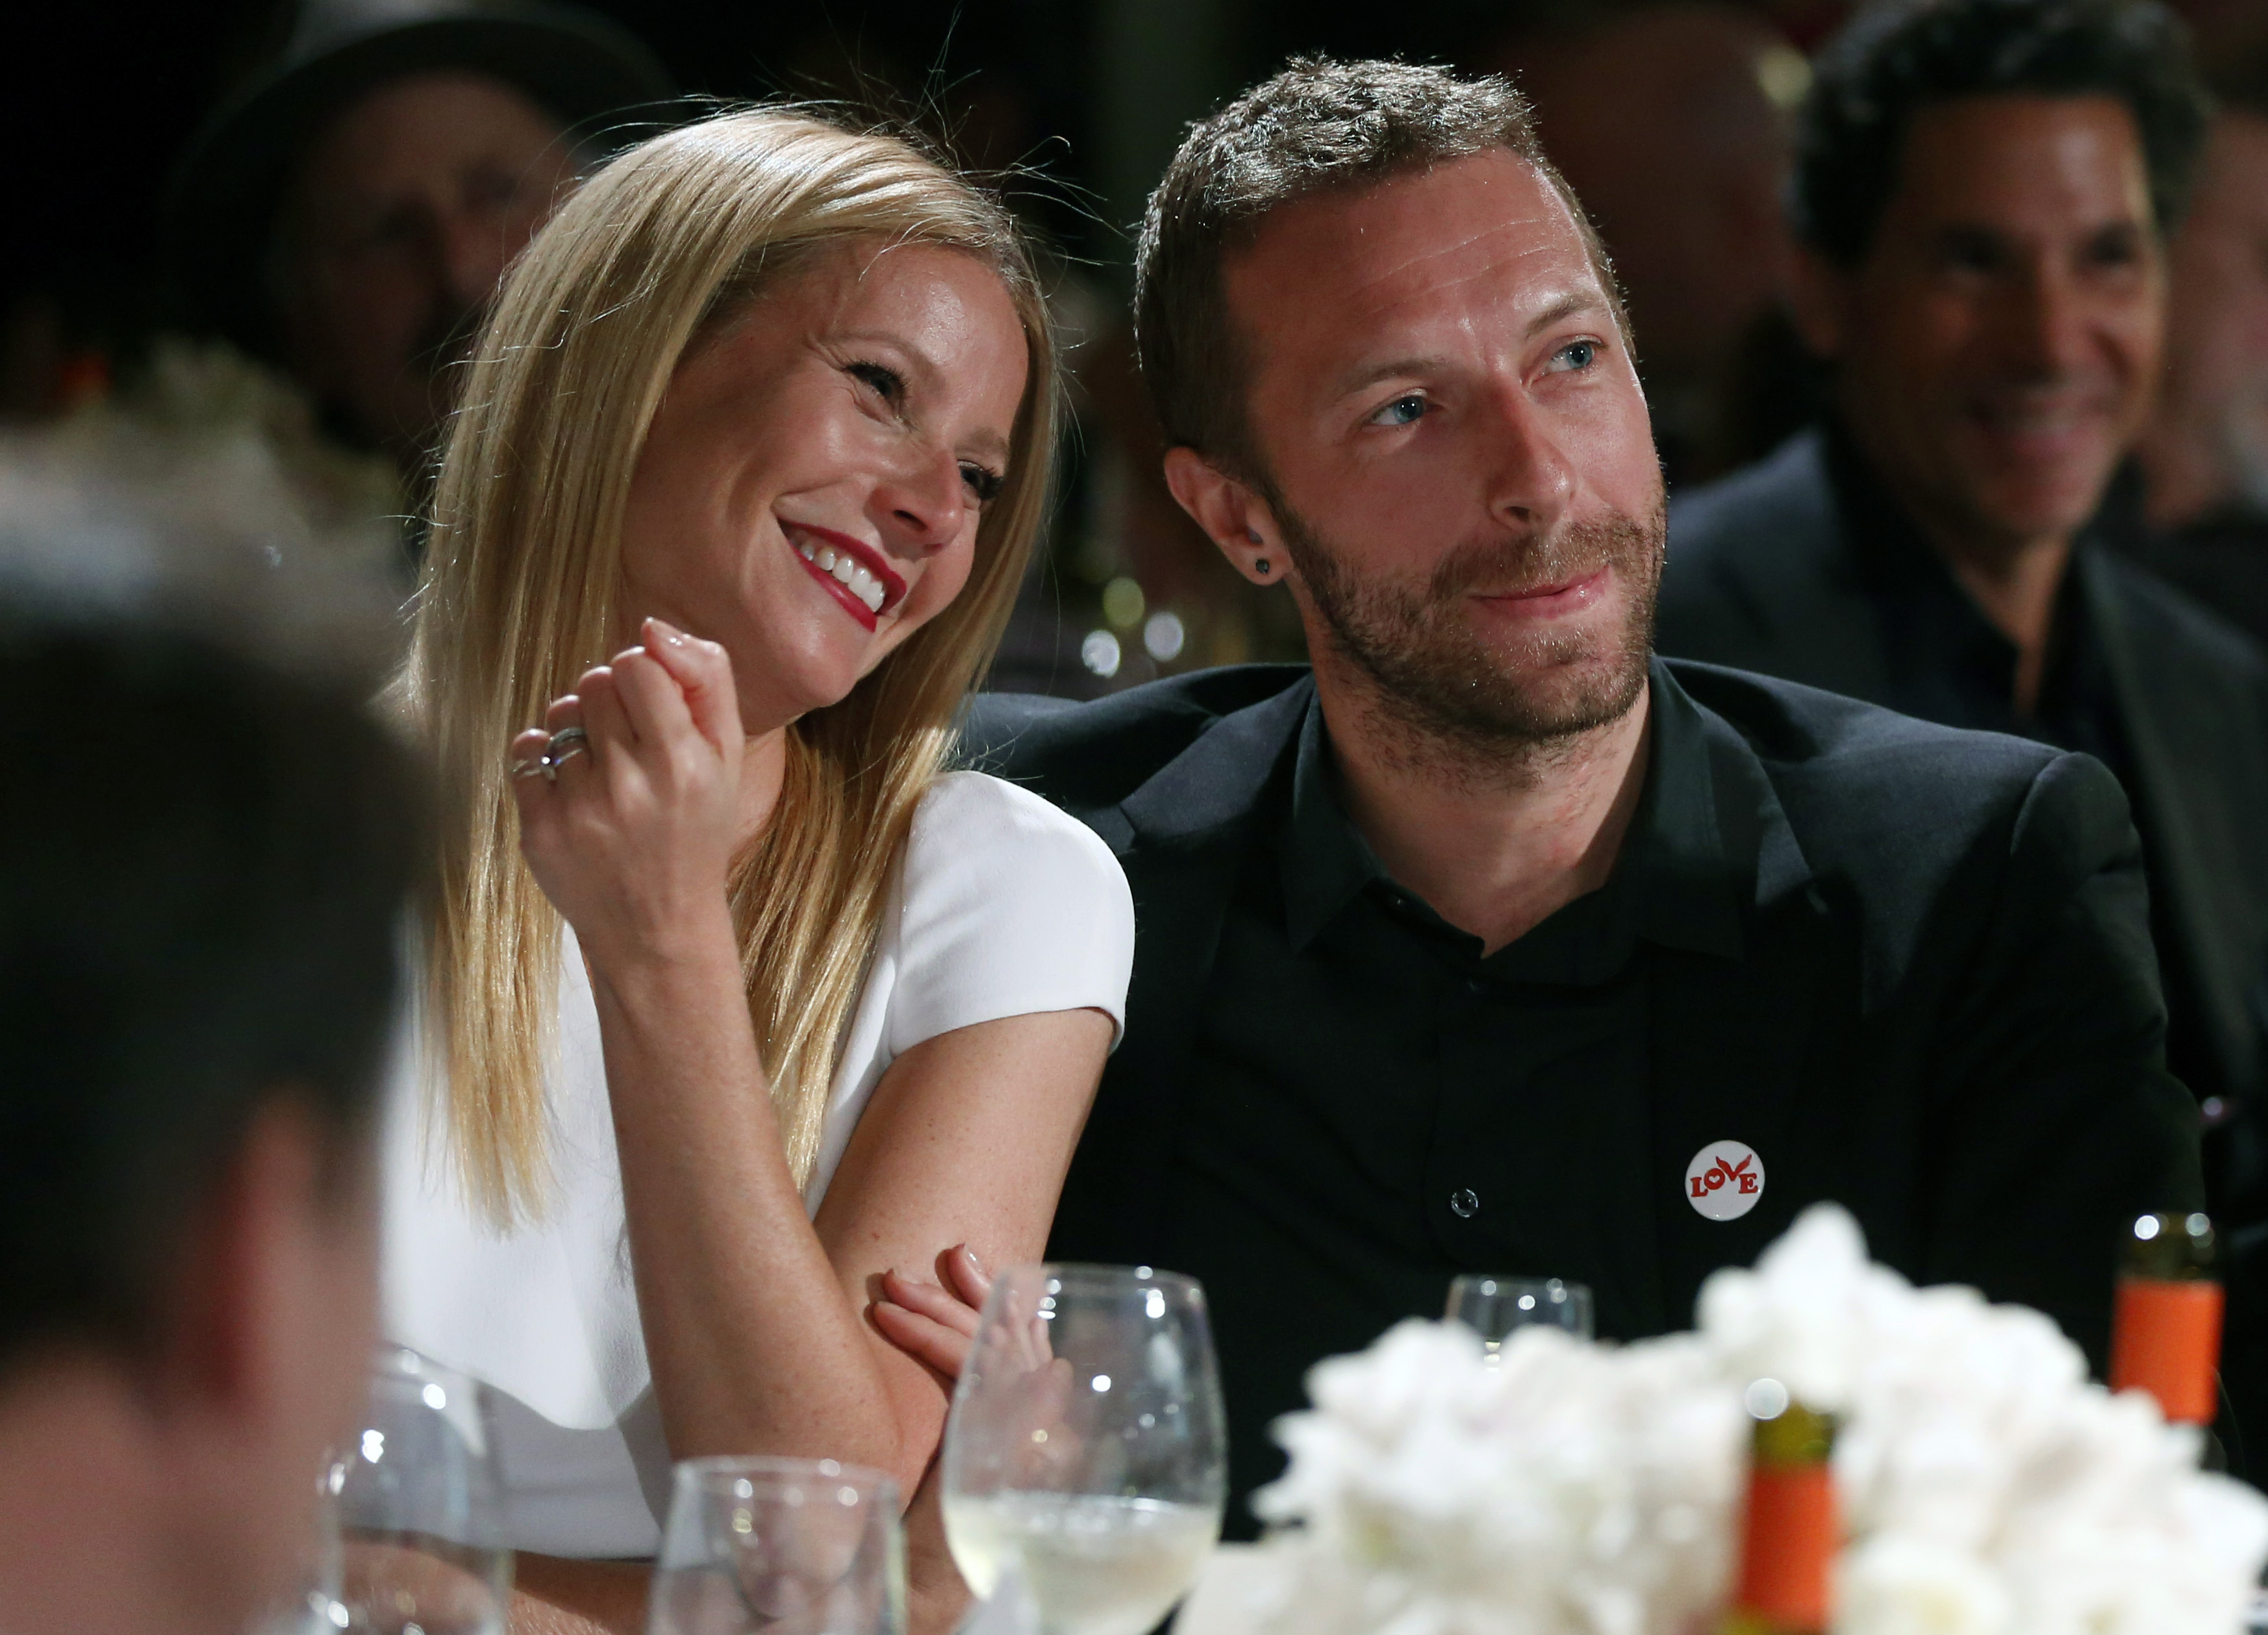 Gwyneth and Chris 'consciously uncoupled' in 2015